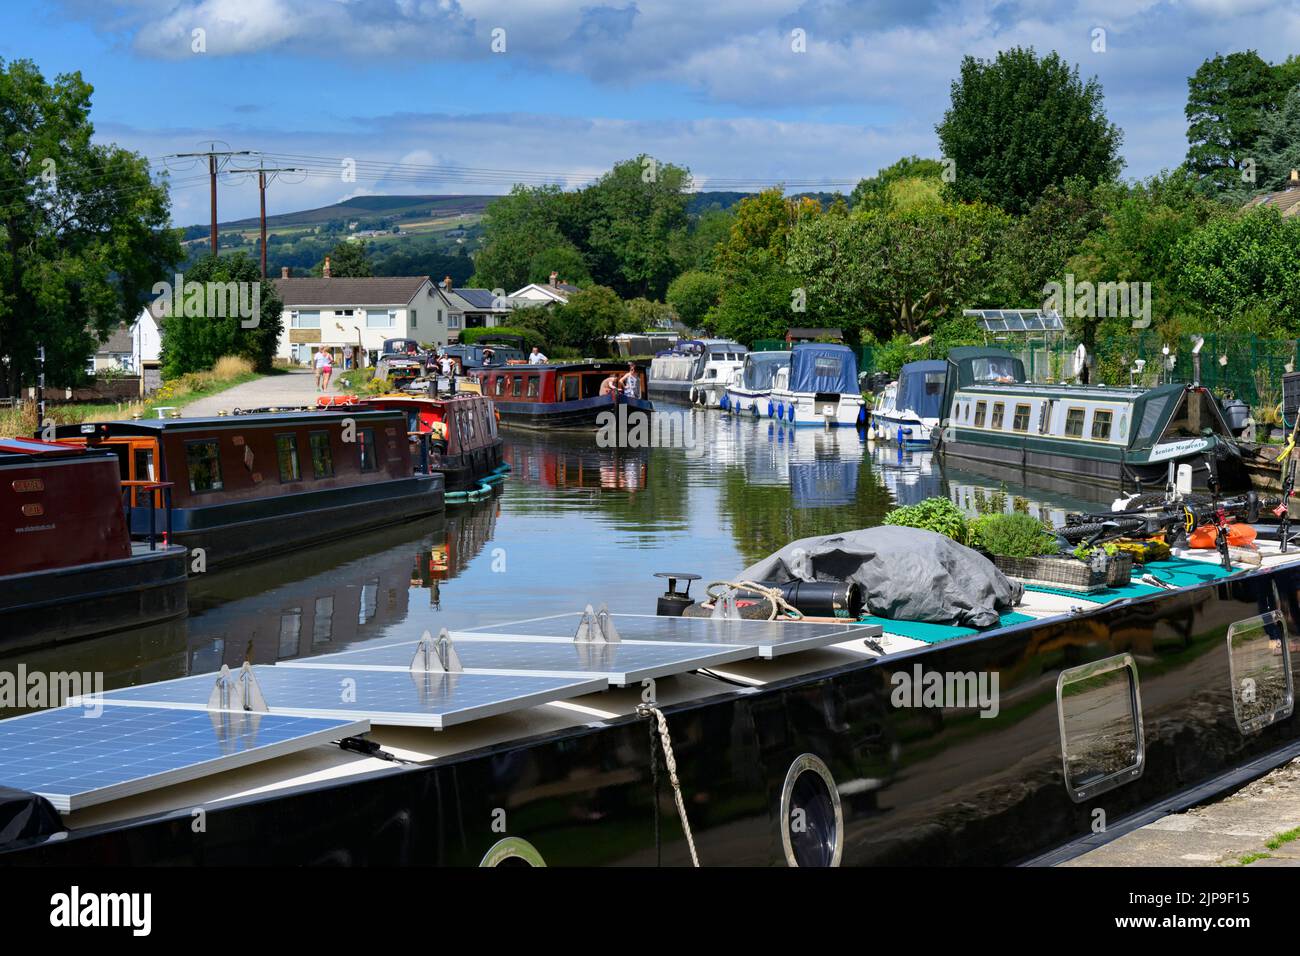 Barges at busy moorings, self-drive hire boat traveling, scenic sunny stretch of Leeds Liverpool Canal & towpath - Bingley, West Yorkshire England UK. Stock Photo